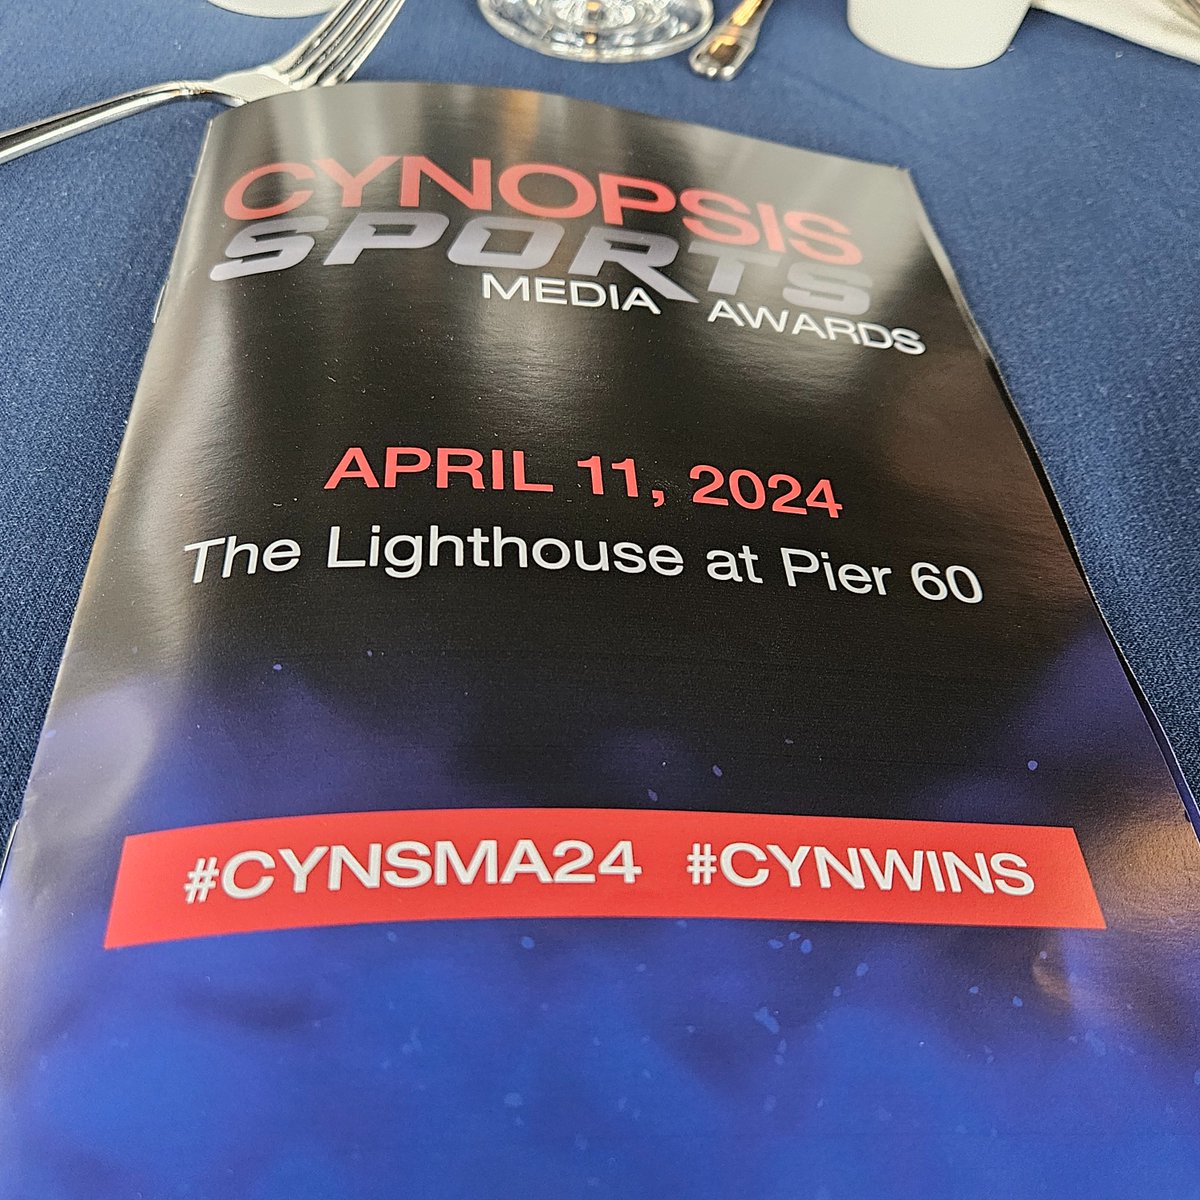 Tangible growth of sports played by or led by humans who happen to be women. @CynopsisMedia awards this AM. Super majority of winners & nominees involved womens events & leadership. Have never seen that before, didn't just 'happen.' Being earned.  #cynsma24 #sportsbiz